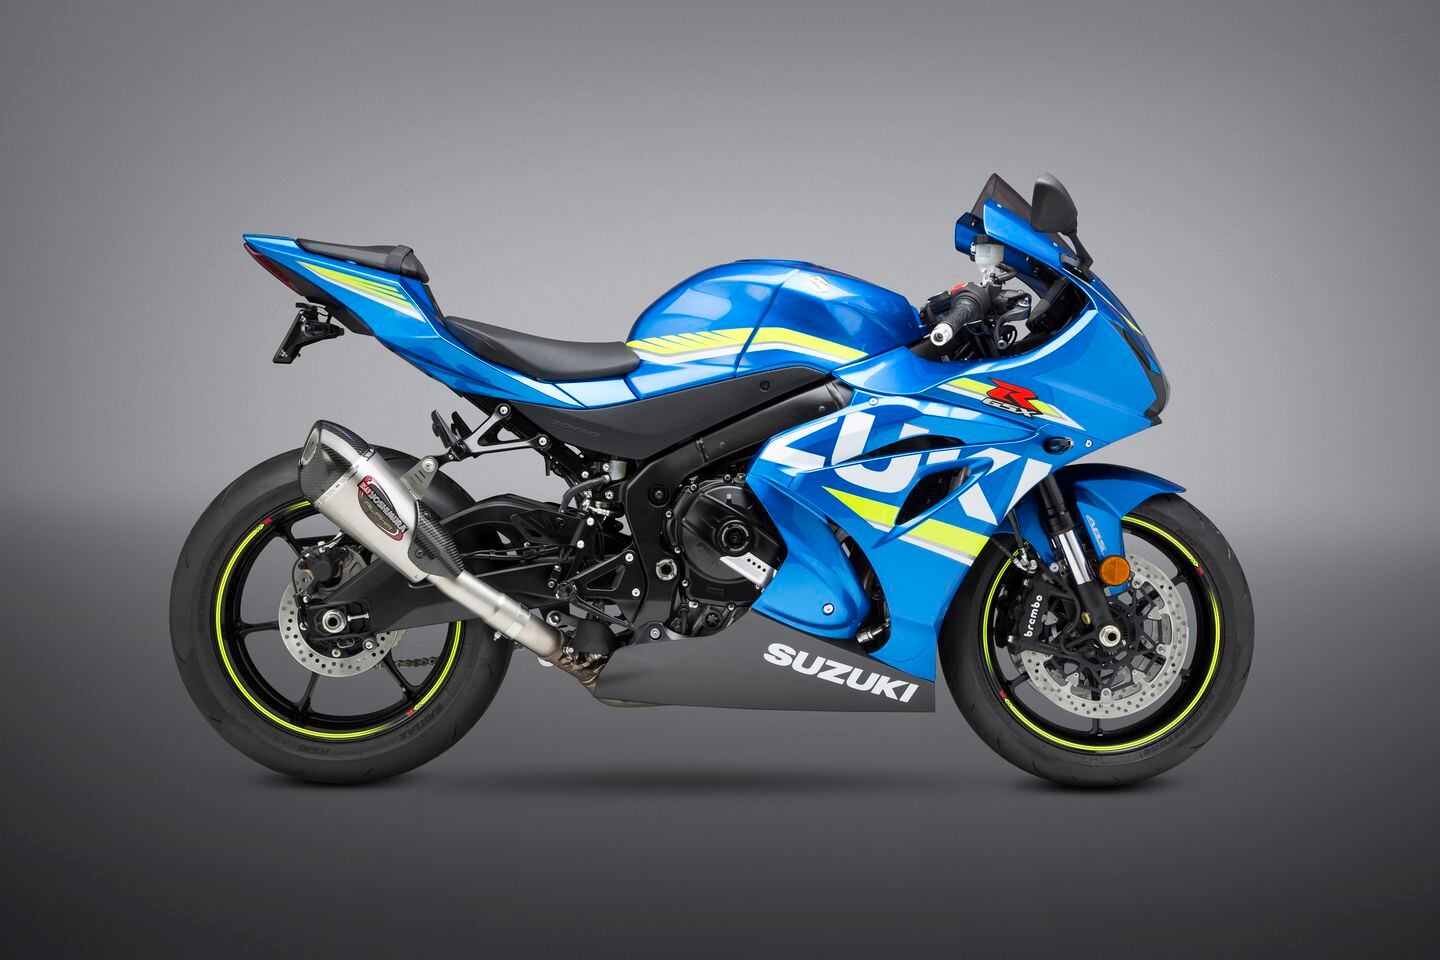 The Latest Slew of Yoshimura Products for the 2017 Suzuki GSX